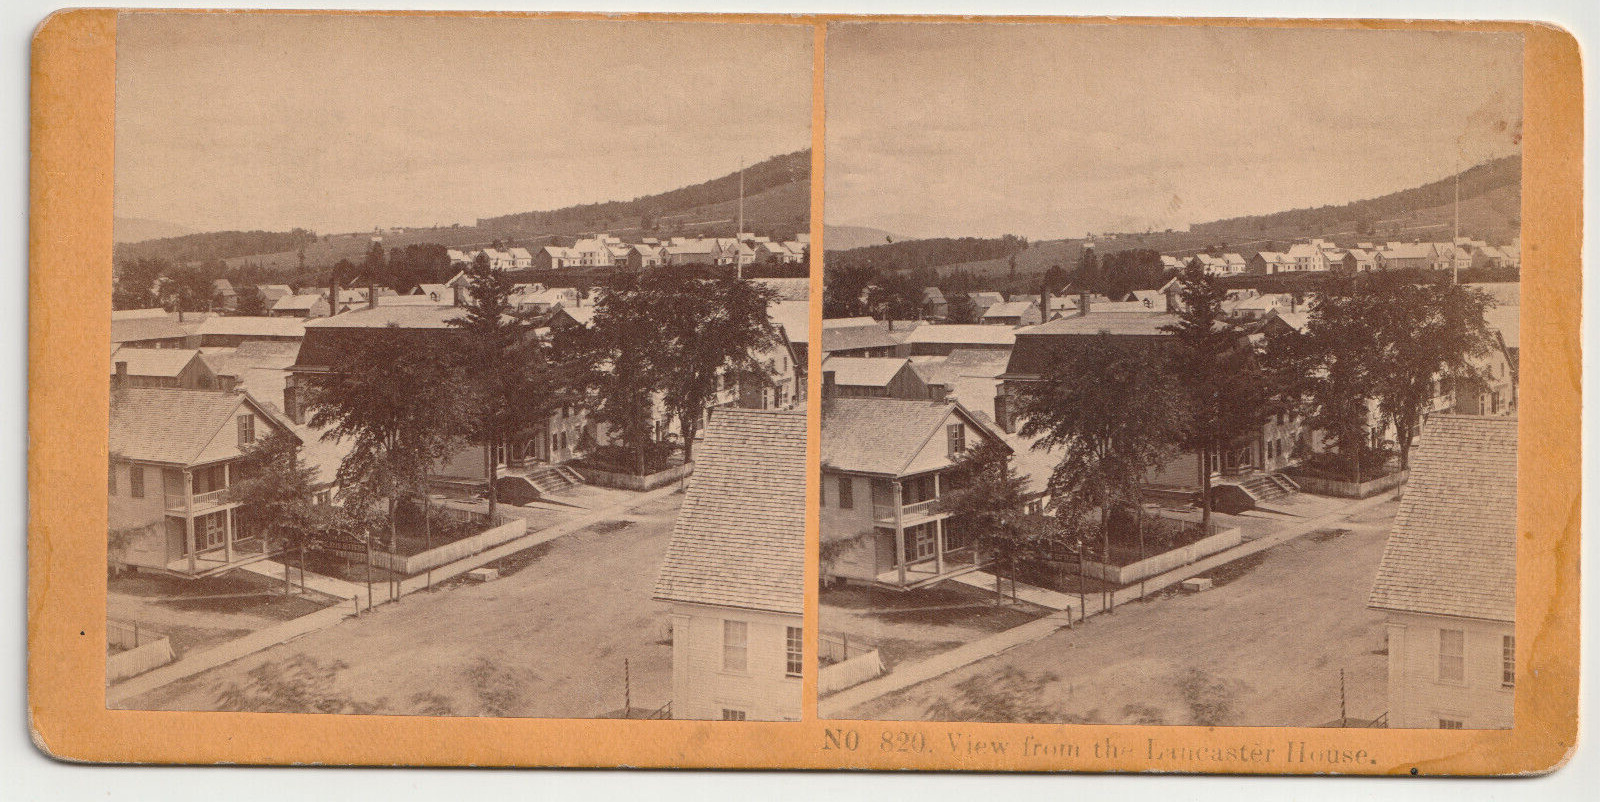 VIEW FROM THE LANCASTER HOUSE - STREET VIEW/SIGNAGE - KILBURN - WHITE MOUNTAINS